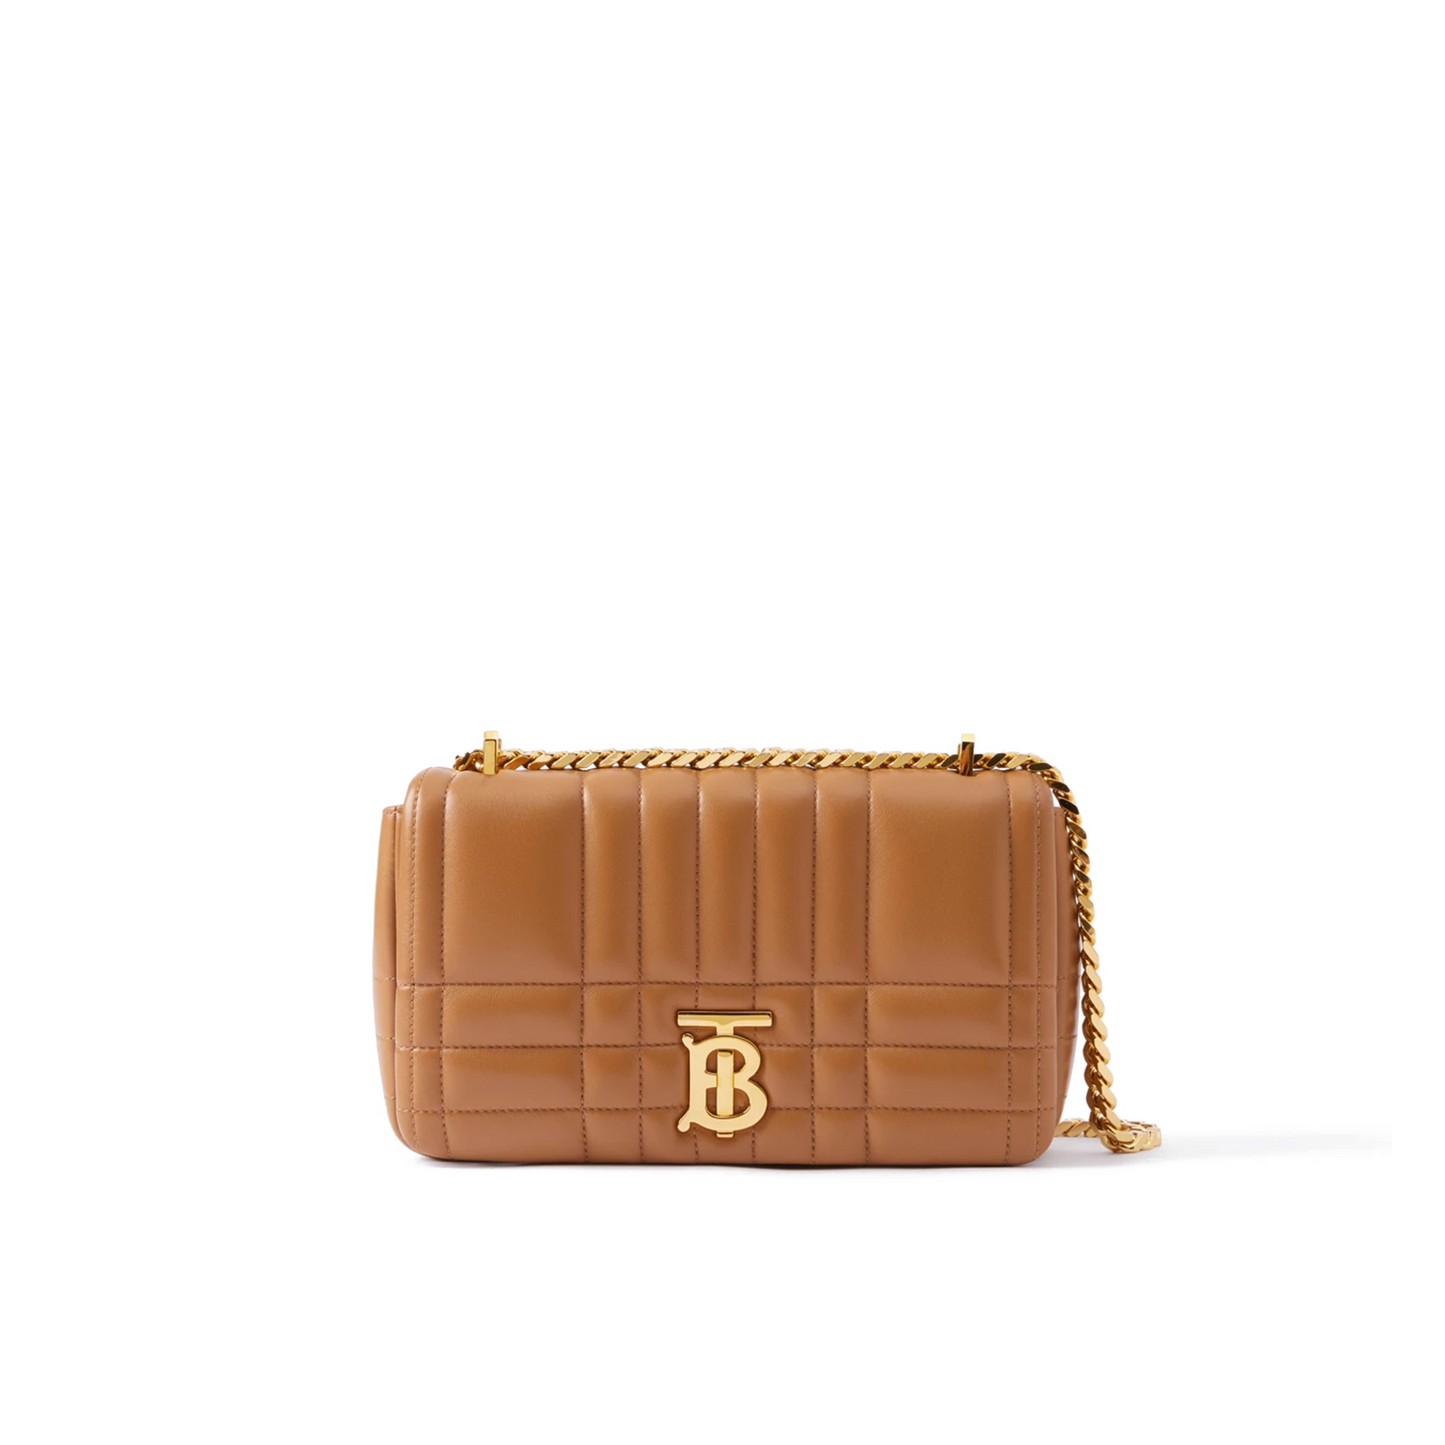 BURBERRY SMALL LOLA BAG IN MAPLE BROWN